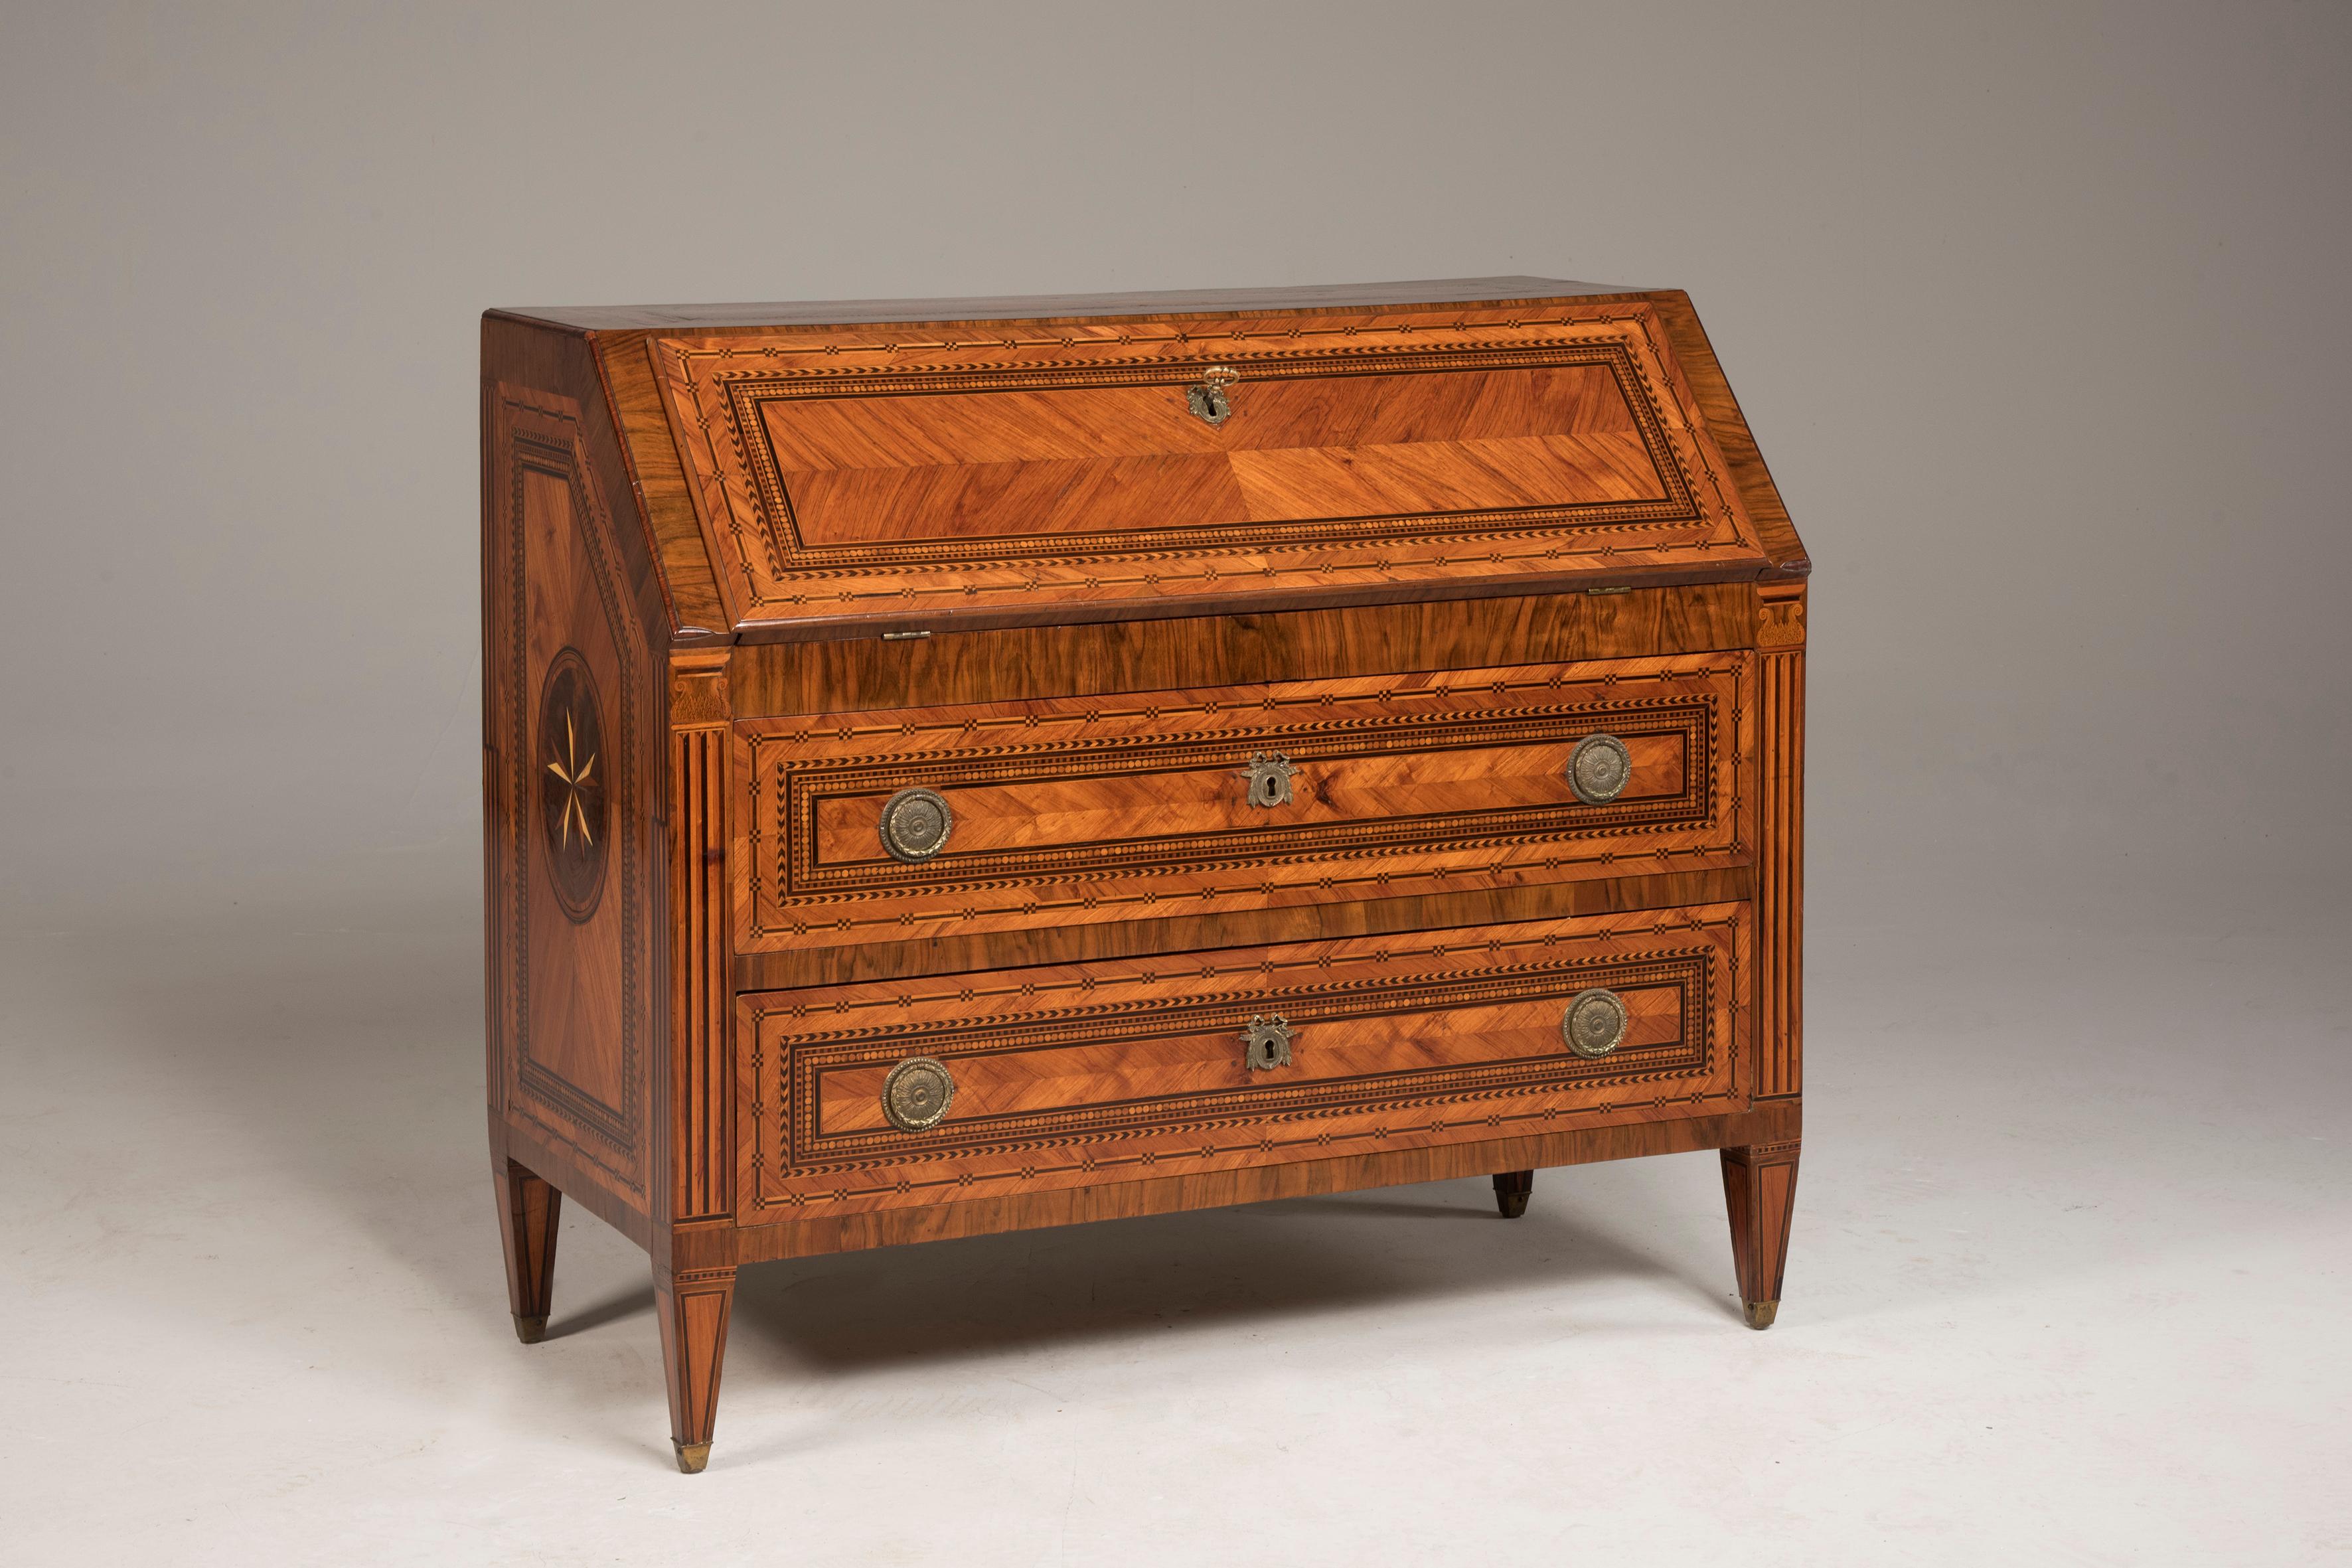 Louis XVI late 18th century Bureau. From Italy from Lombardy region. It features two drawers with coeval rounded handles, as the rest of the hardware. Behind the tilt door it features a leather covered writing surface and four small drawers.